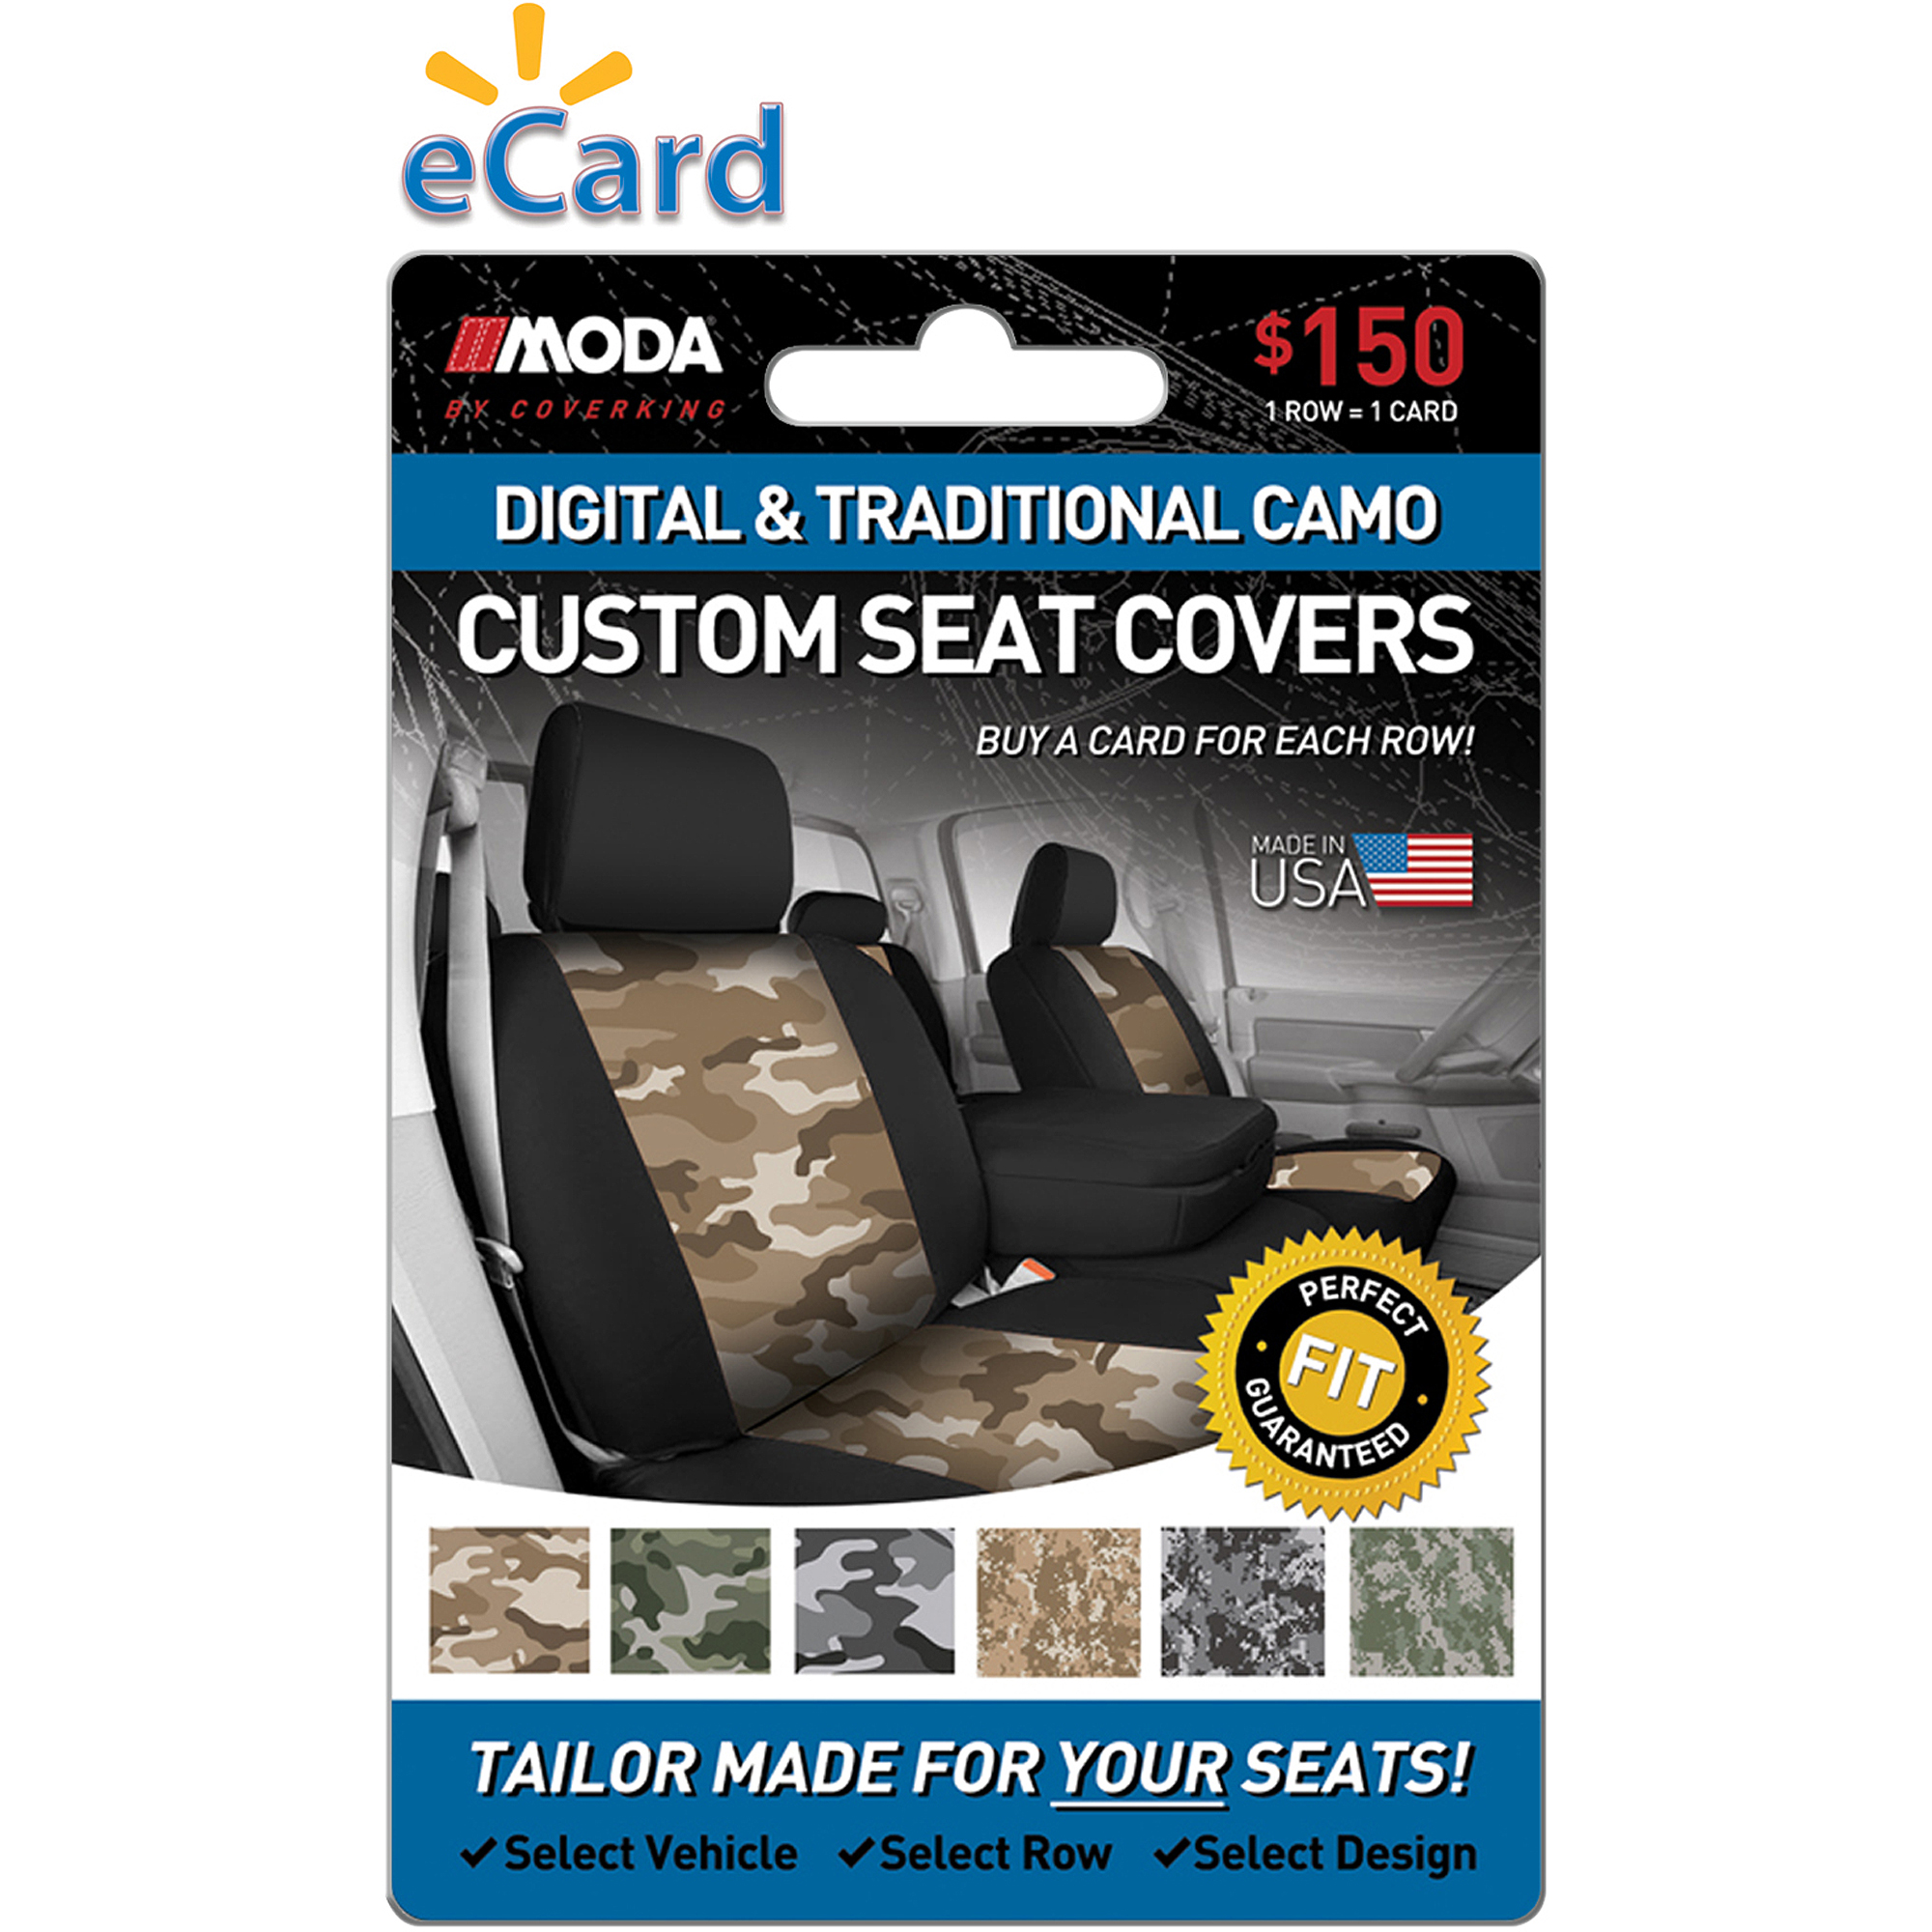 MODA by Coverking Designer Custom Seat Covers Camo $150 (Email Delivery) - image 1 of 3